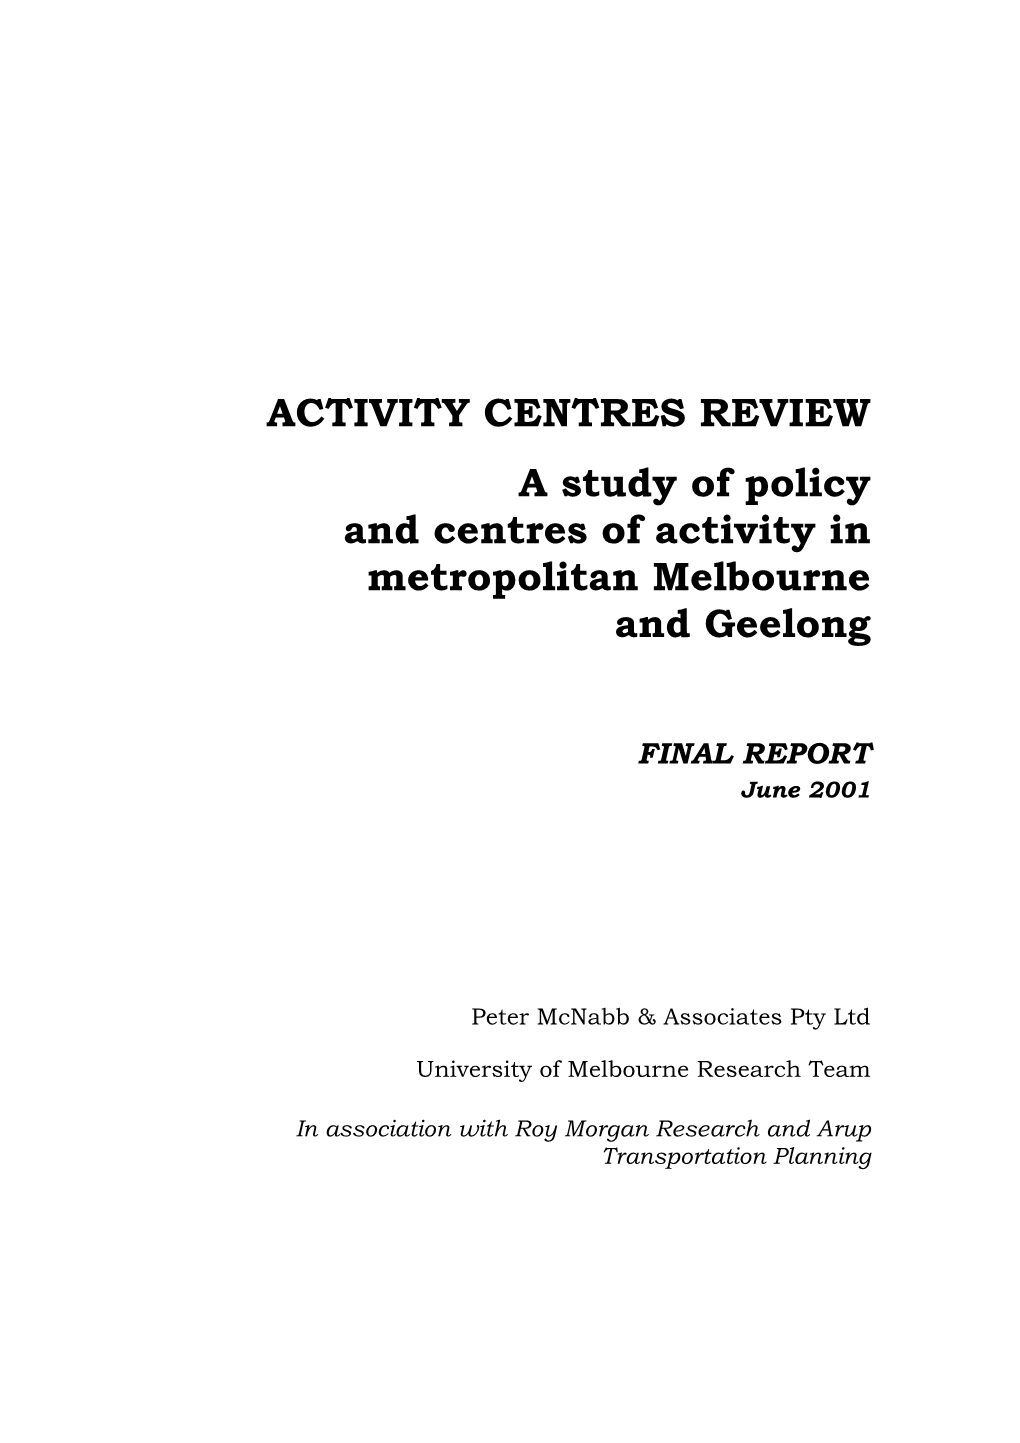 Activity Centres Review, June 2001